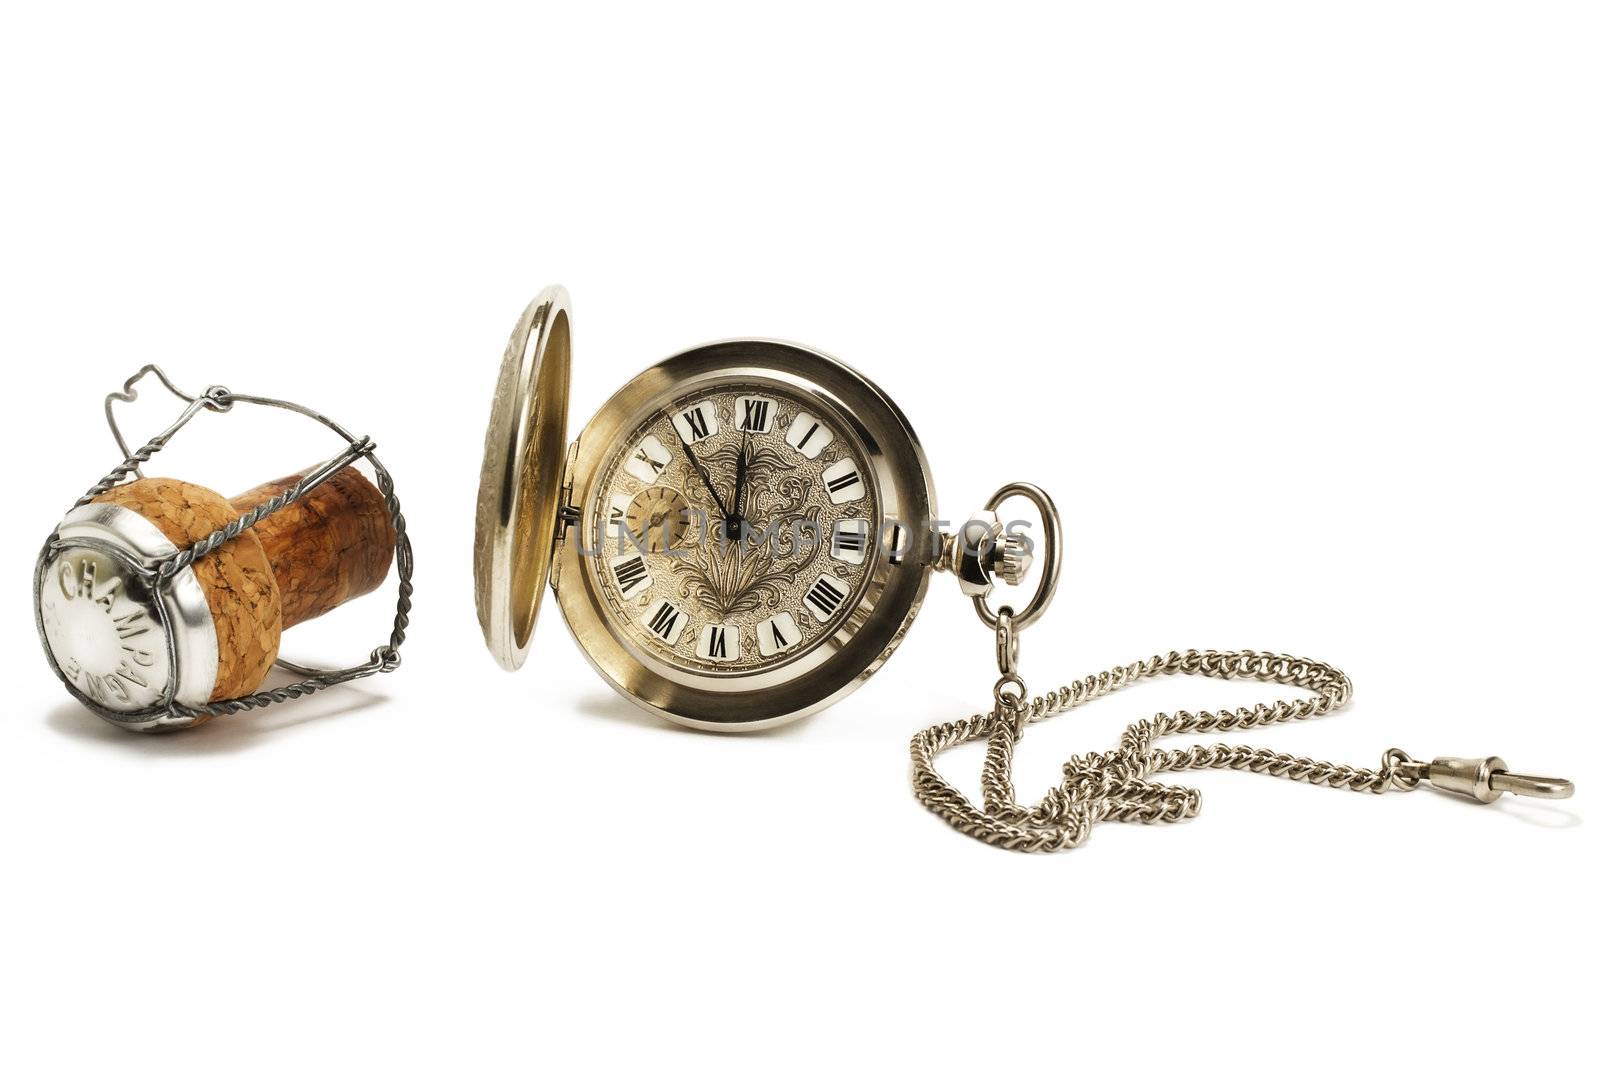 old pocket watch with a cork on white background